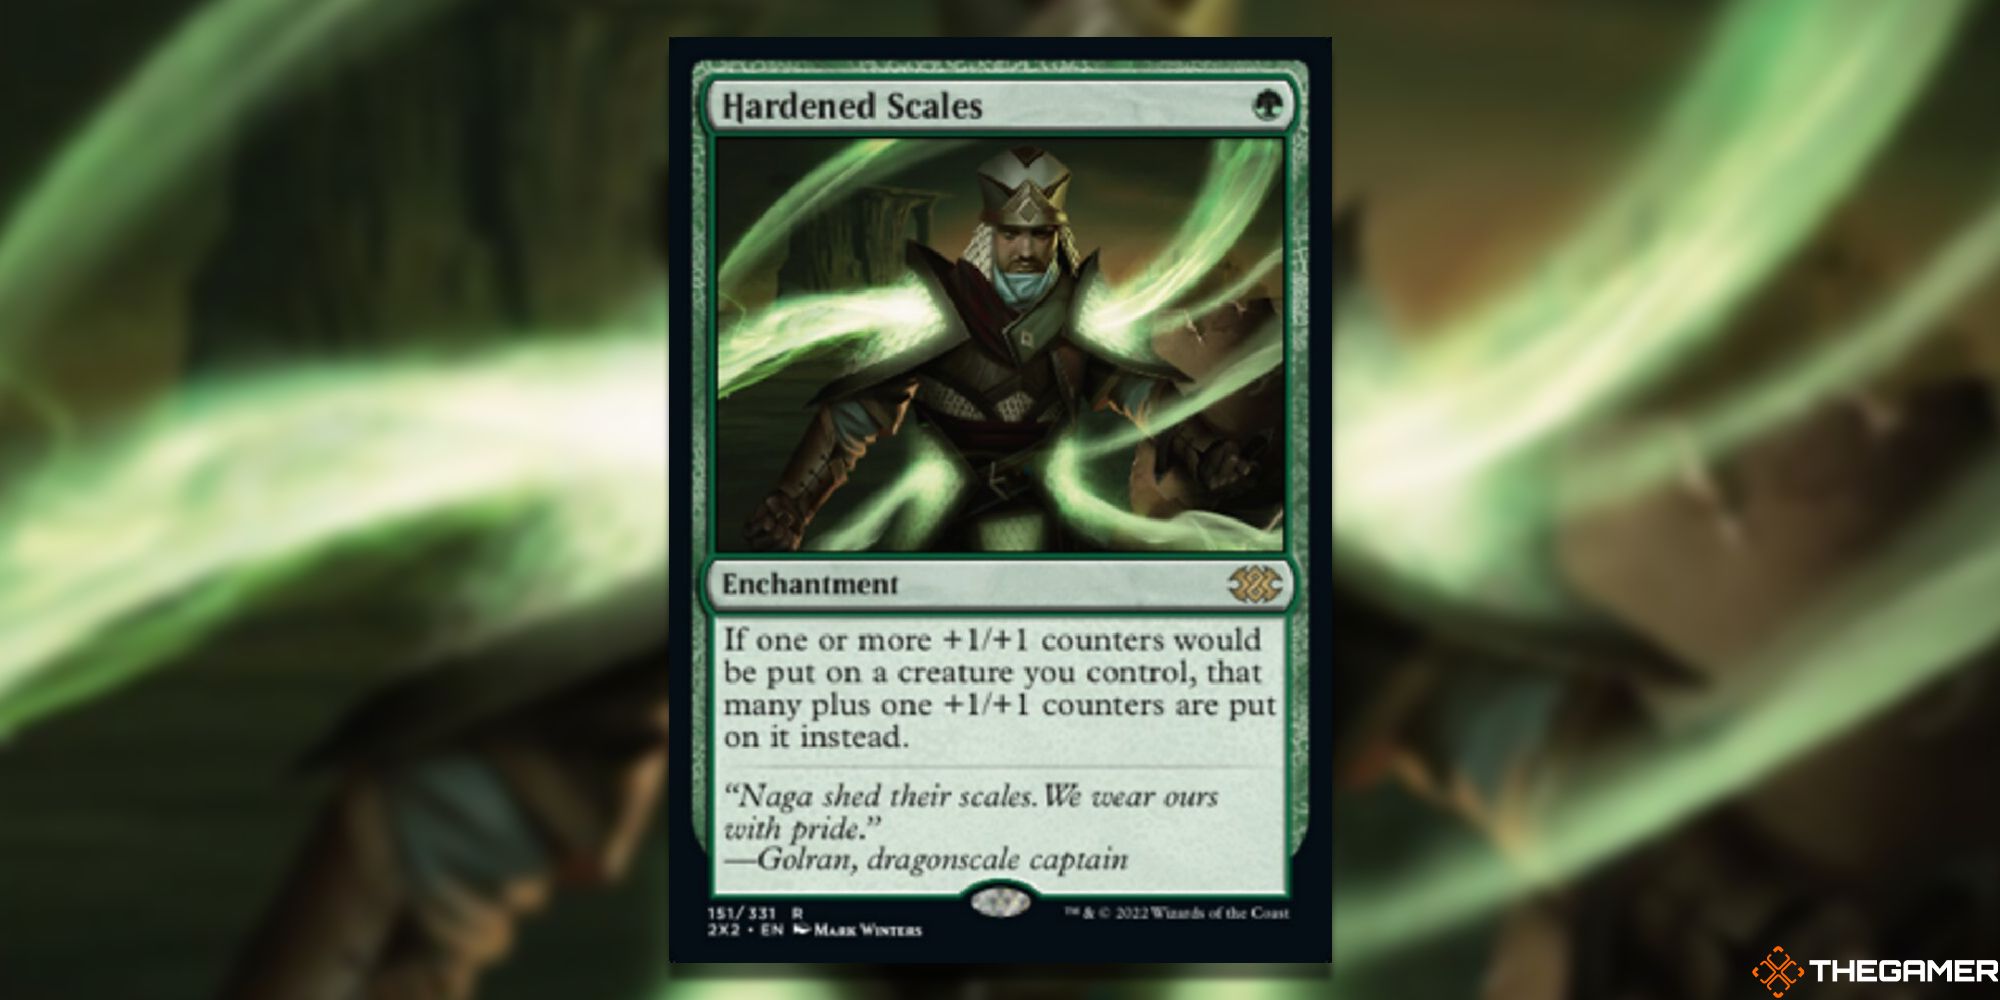 Image of the Hardened Scales card in Magic: The Gathering, with art by Mark Winters